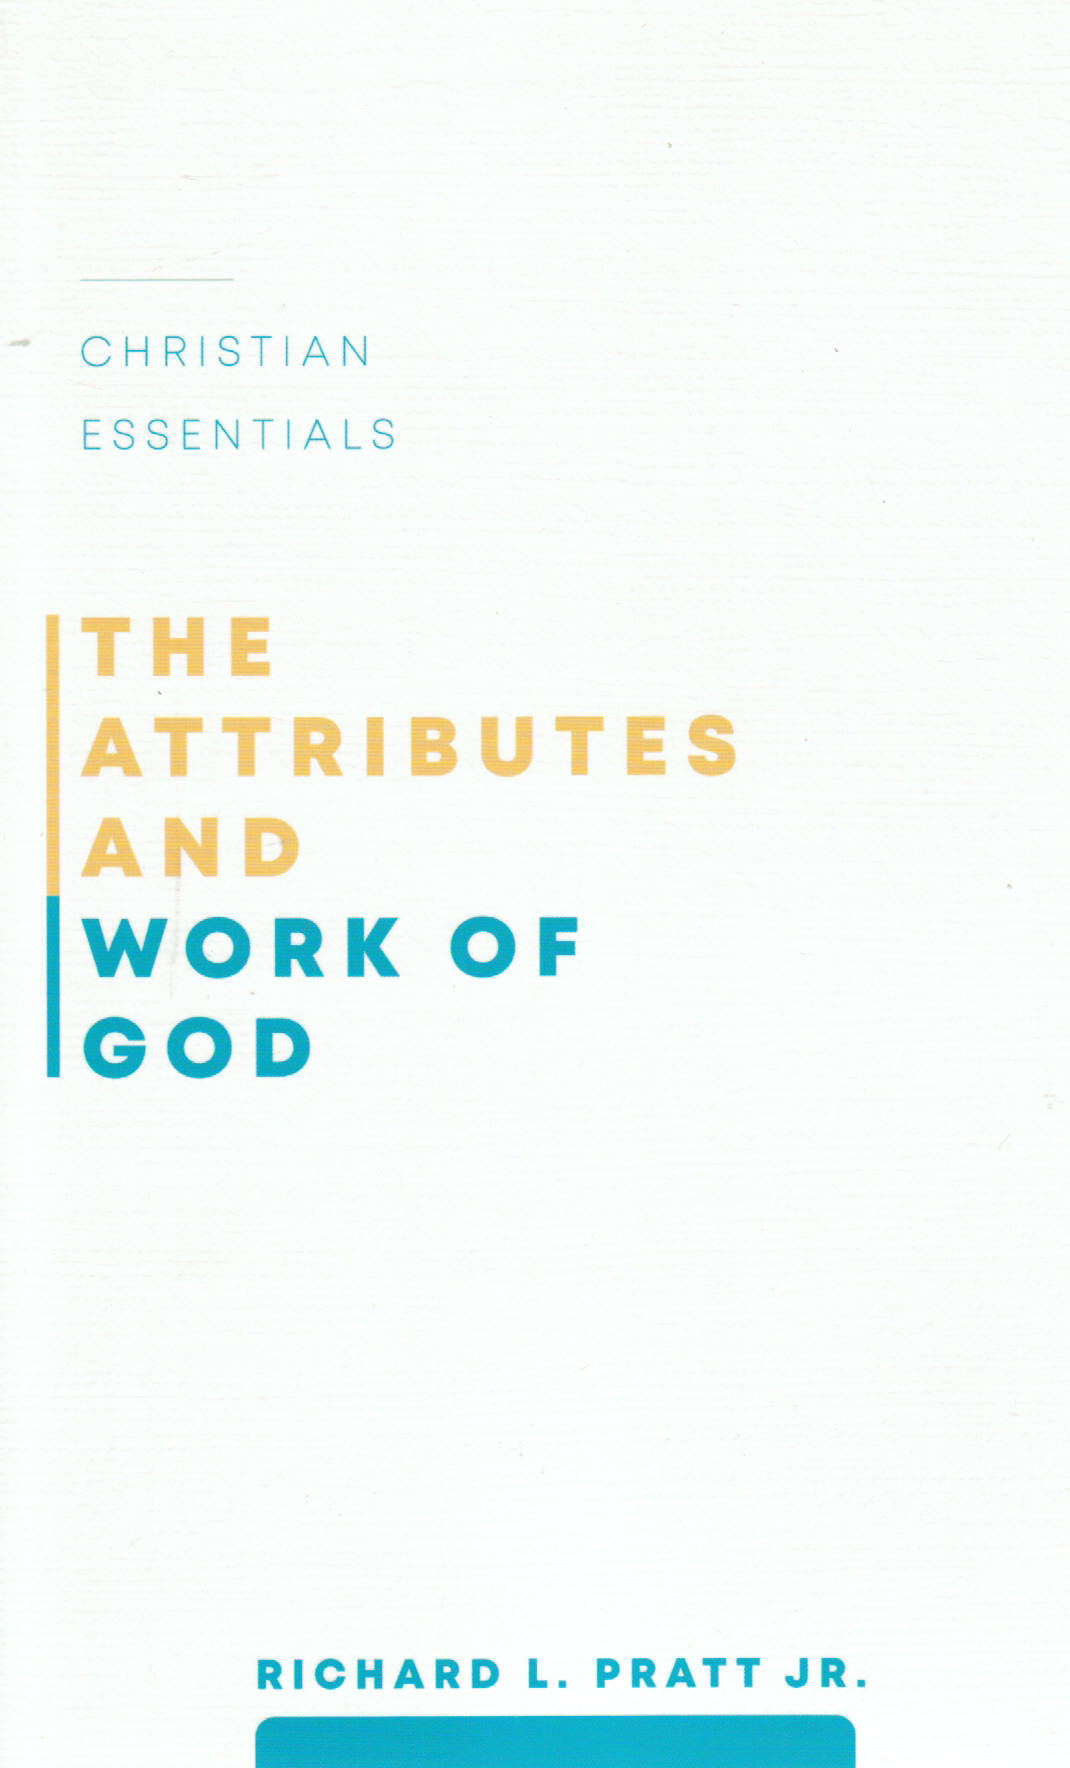 Christian Essentials - The Attributes and Work of God